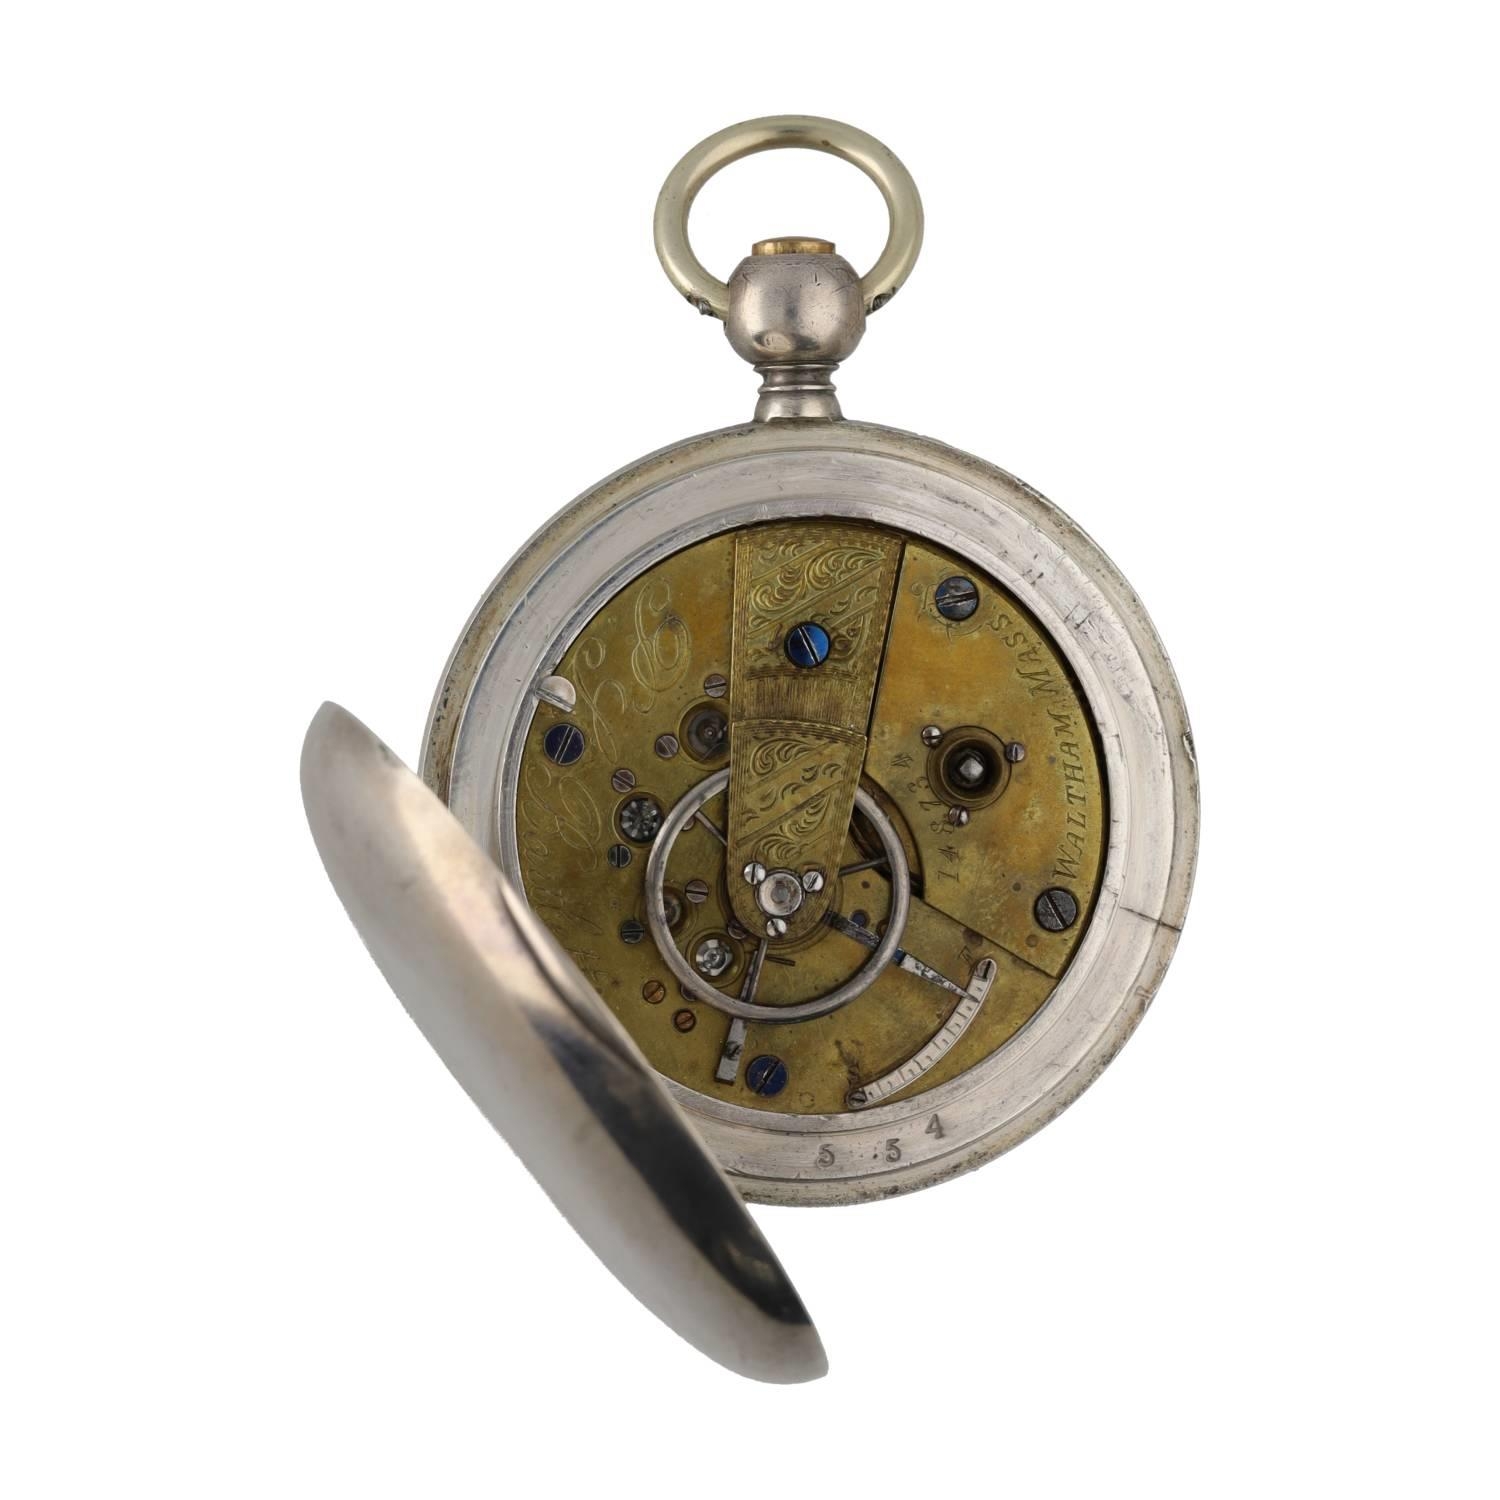 Early American Waltham 'P.S. Bartlett' lever hunter pocket watch, circa 1864, serial no. 148734, - Image 2 of 4